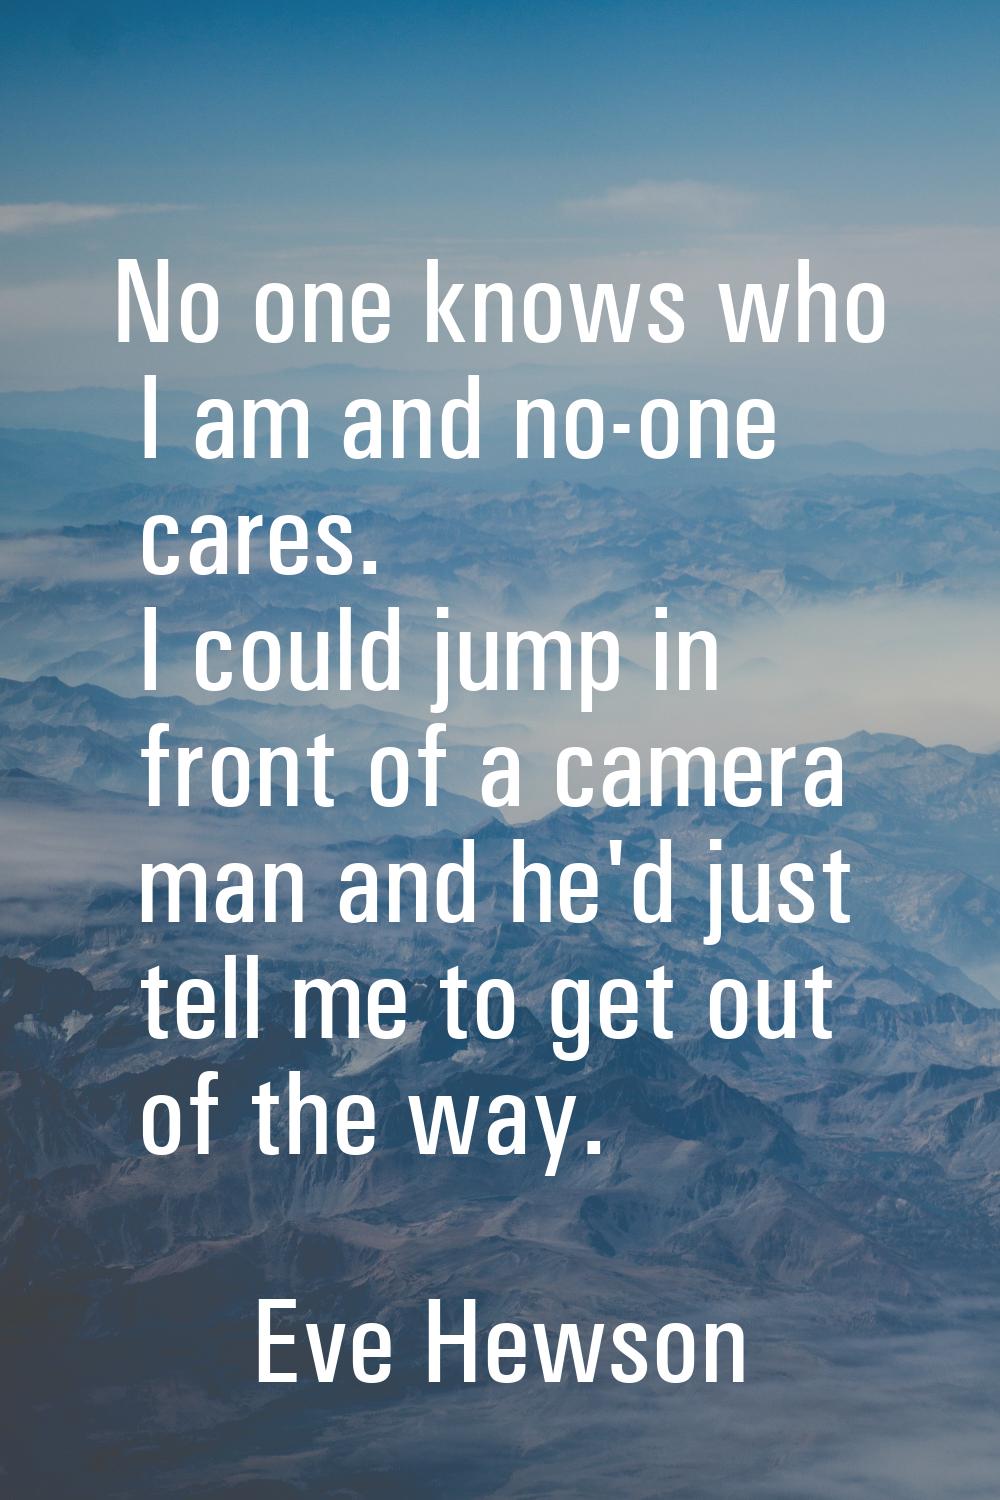 No one knows who I am and no-one cares. I could jump in front of a camera man and he'd just tell me